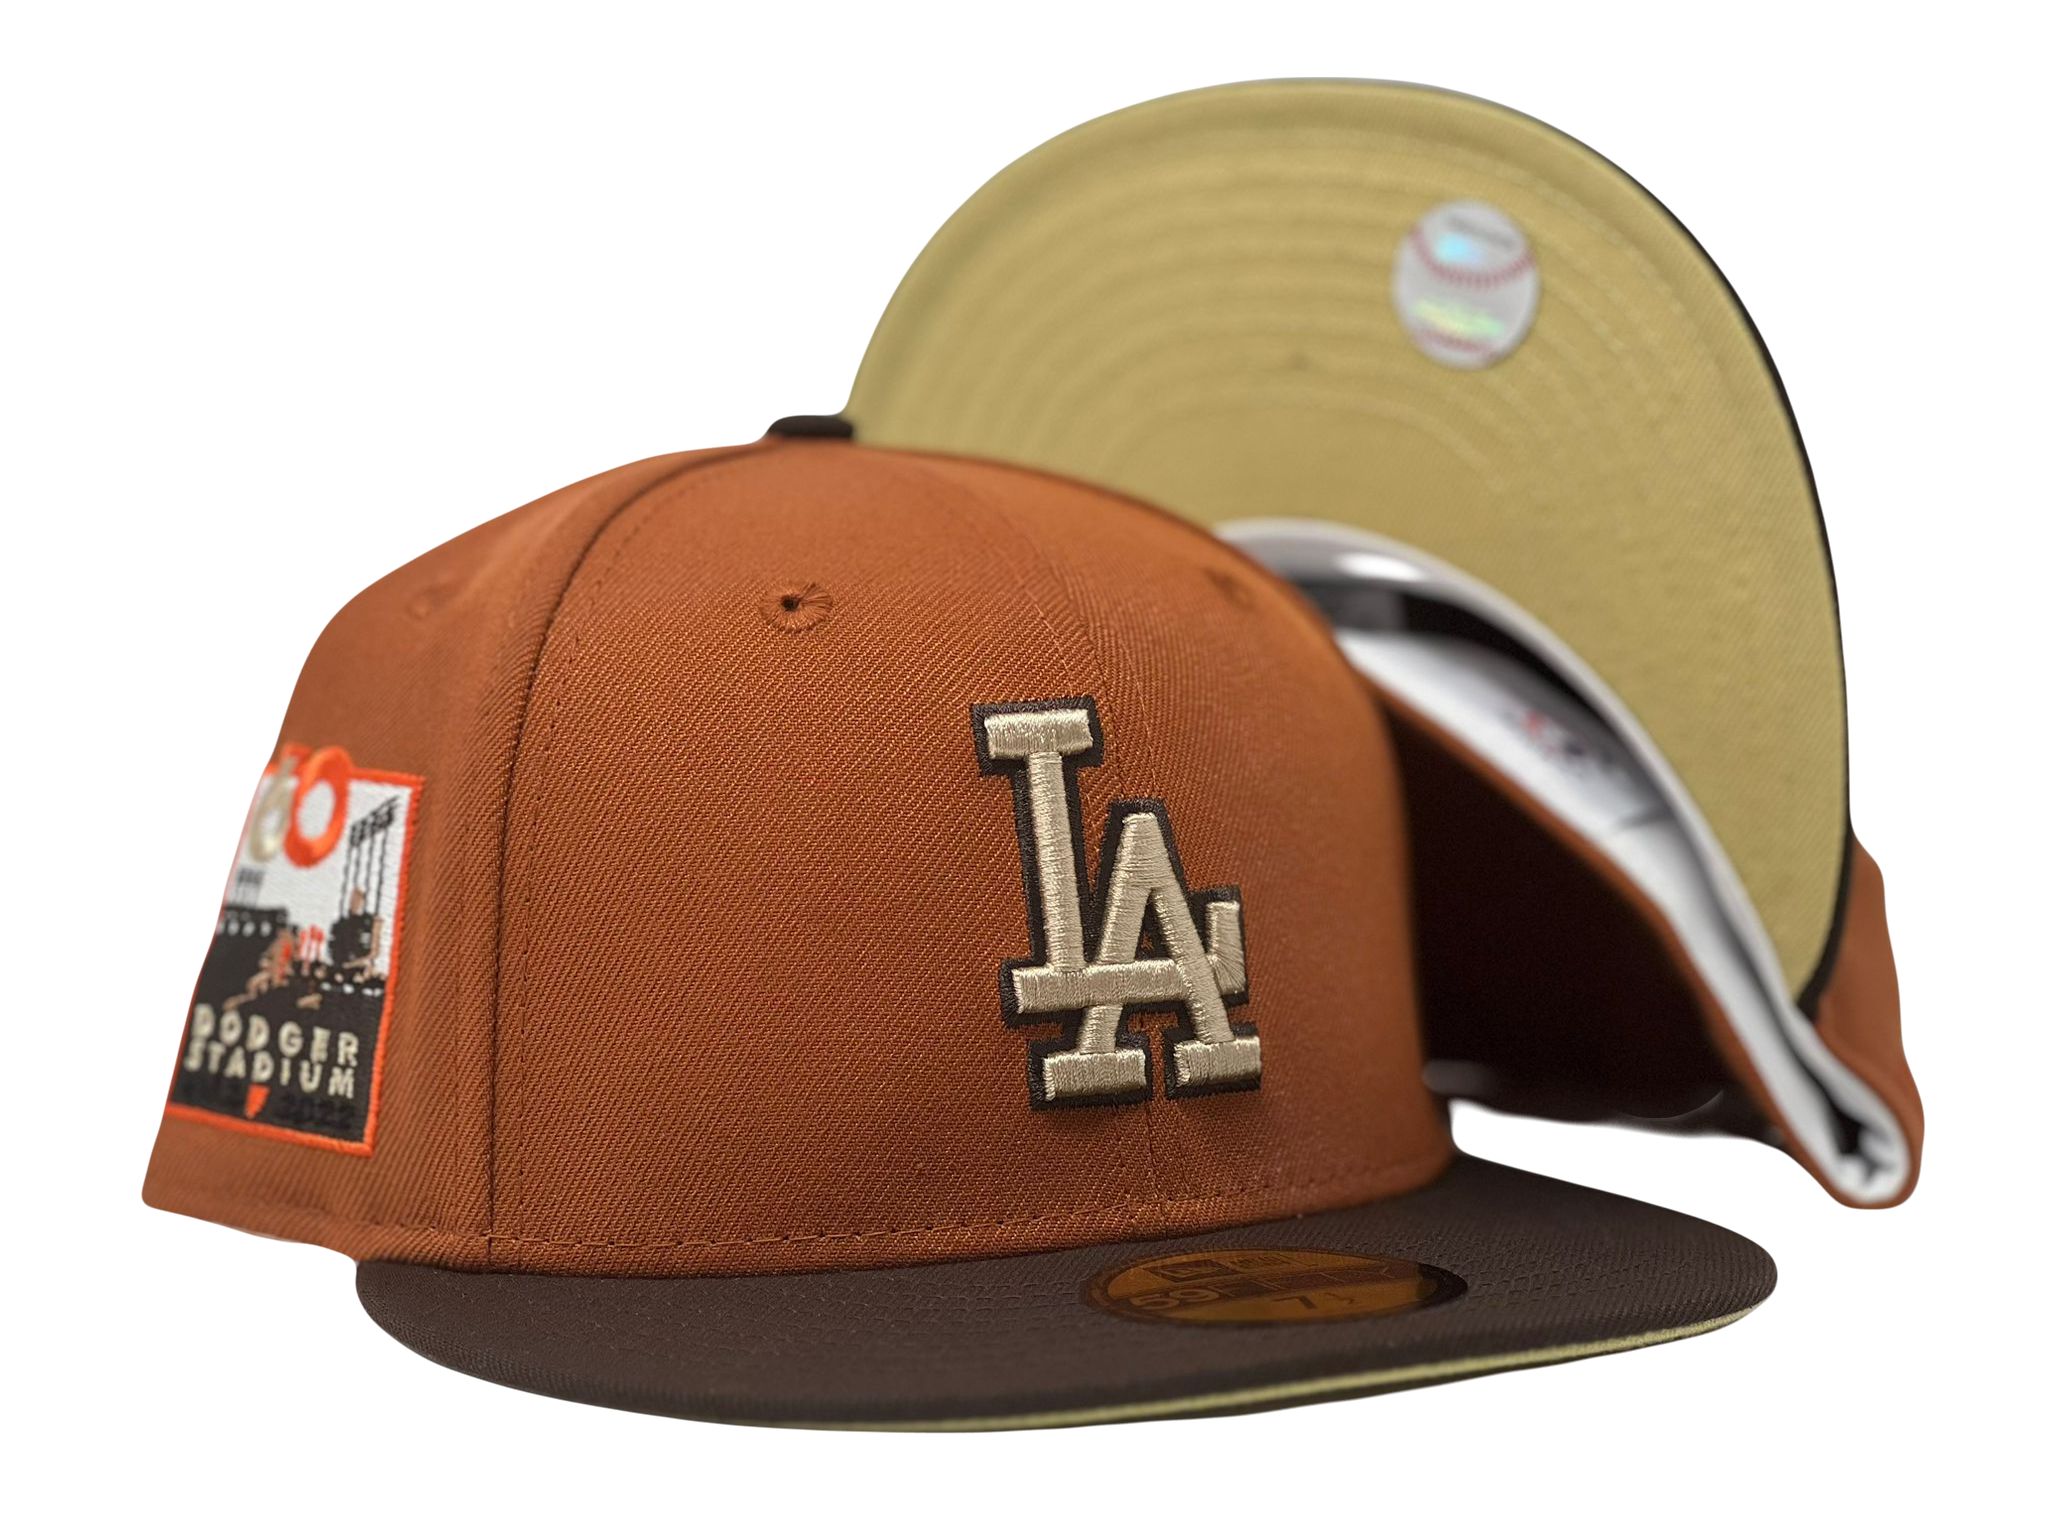 LOS ANGELES DODGERS 60TH ANNIVERSARY VEGAS GOLD BRIM ERA FITTED